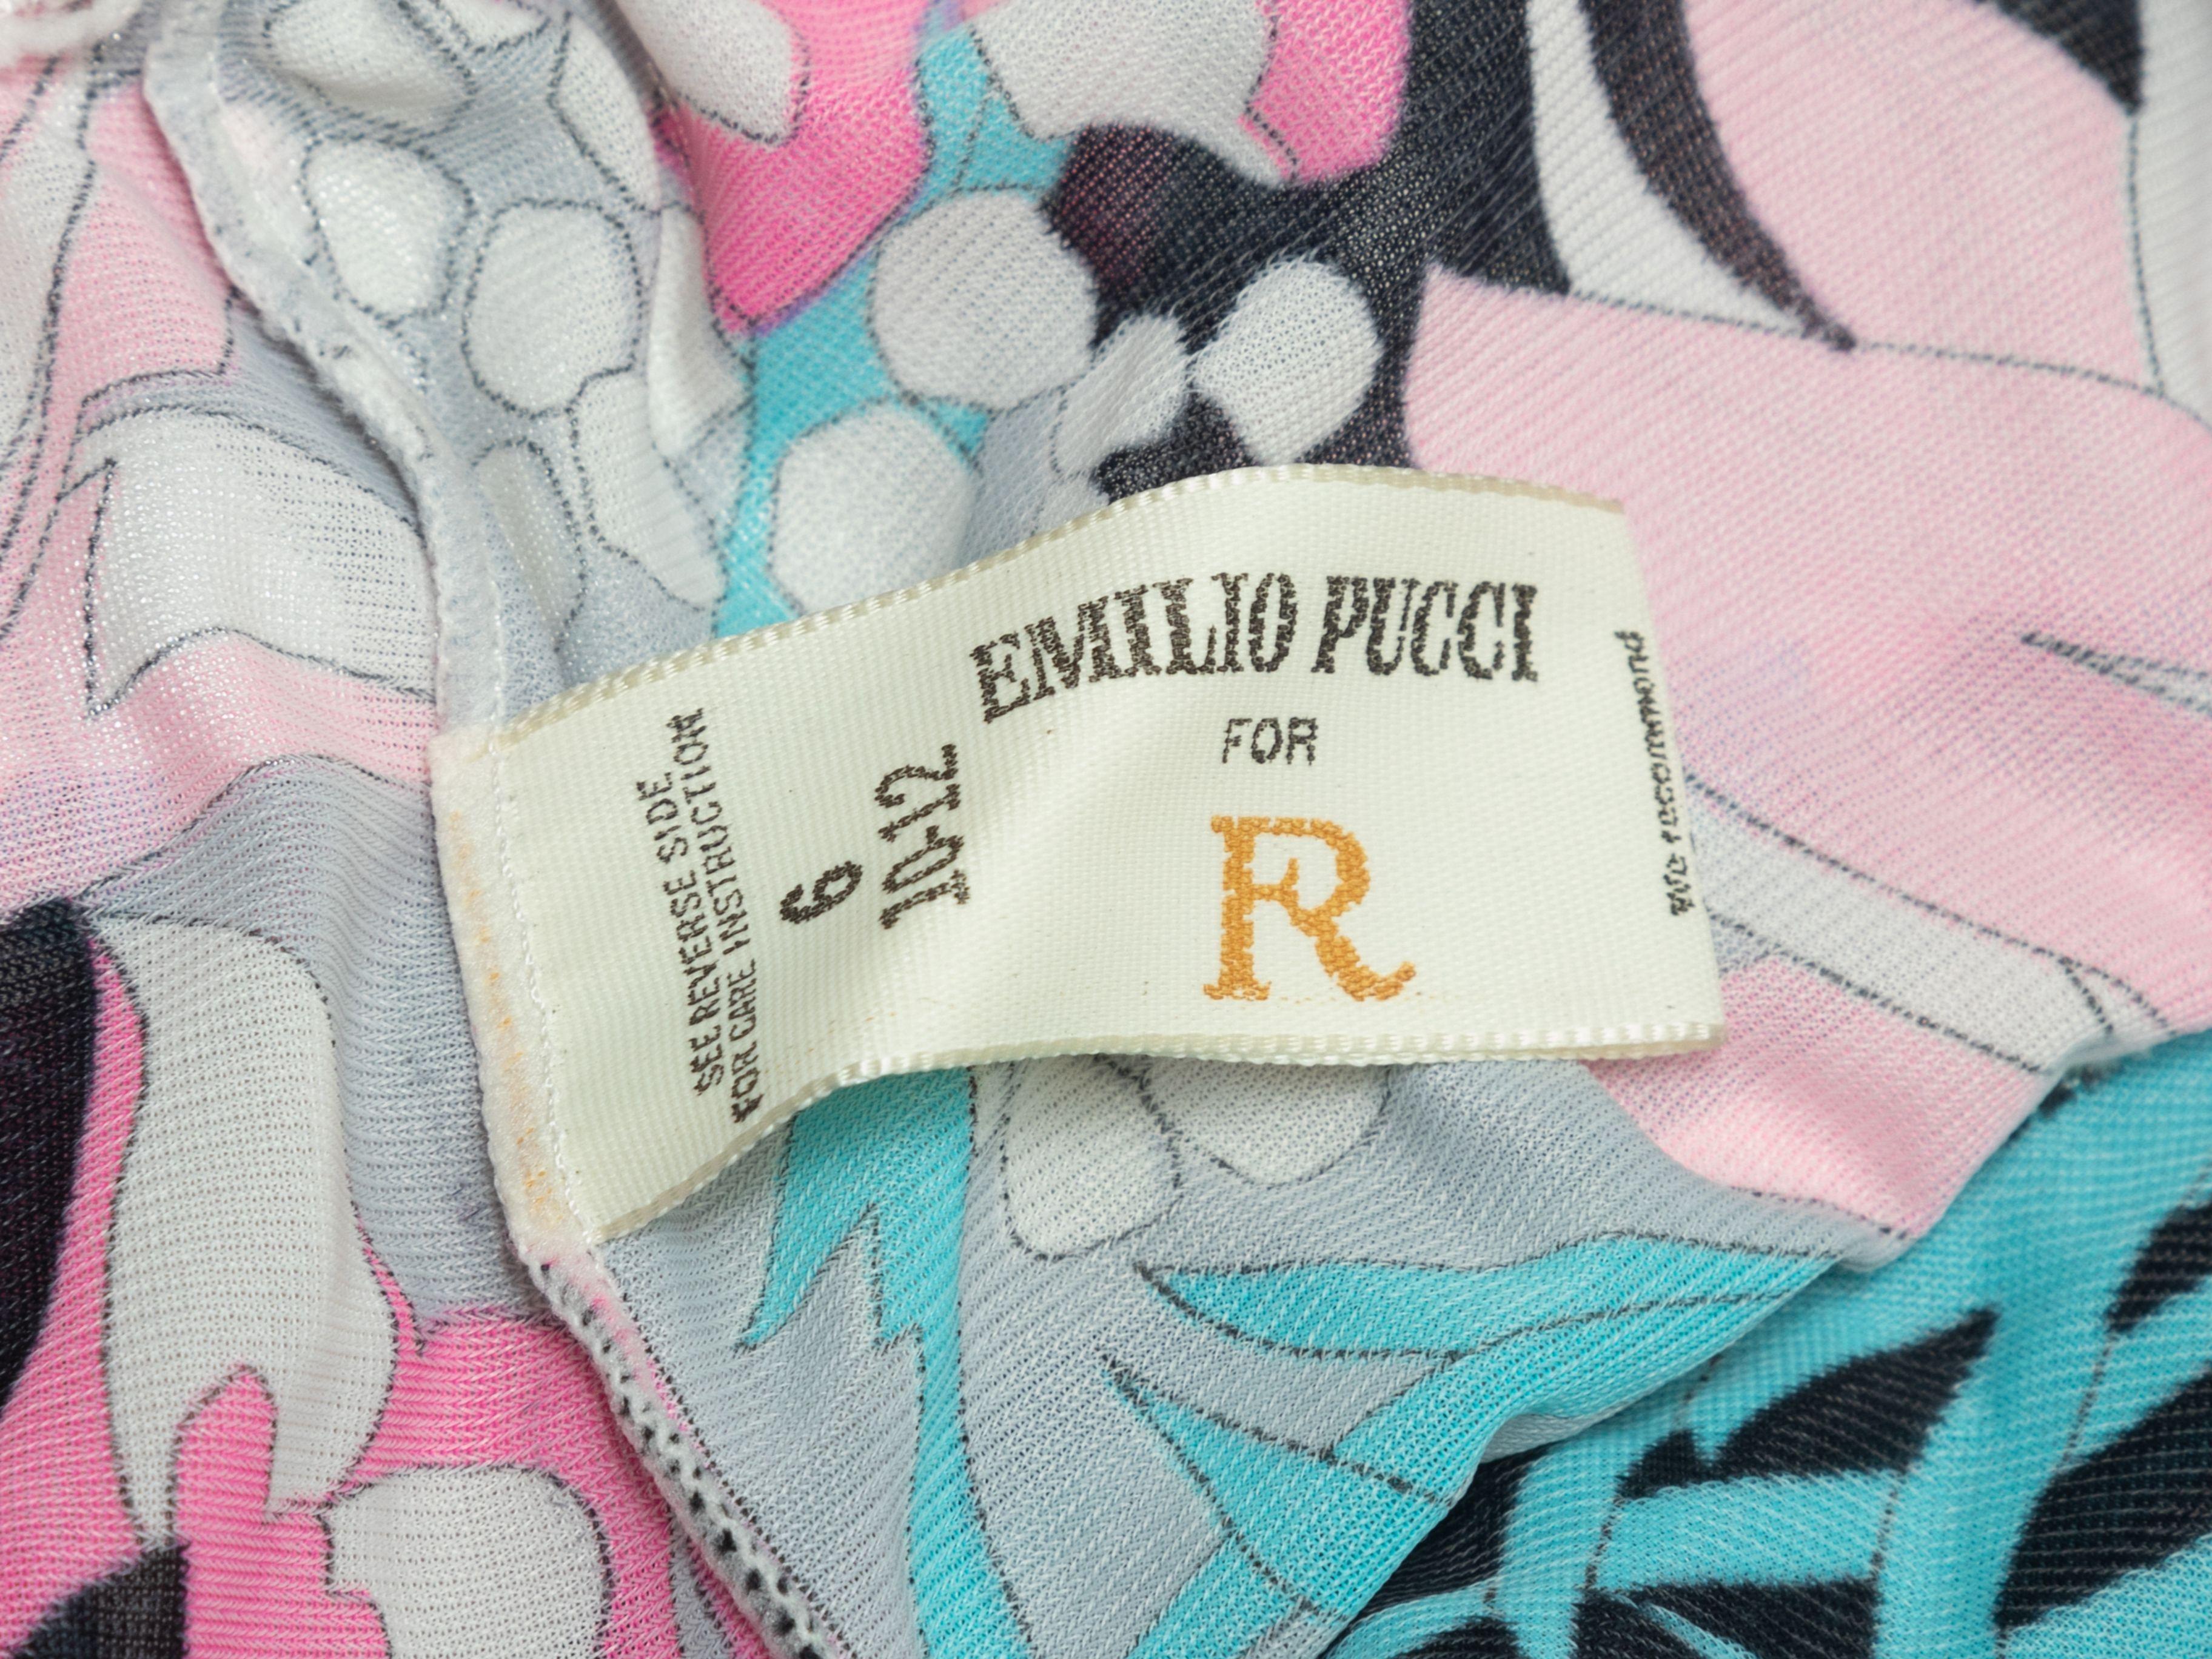 Product Details: Vintage black and multicolor floral print briefs by Emilio Pucci for Formfit Rogers. Elasticized waistband and leg openings. 25